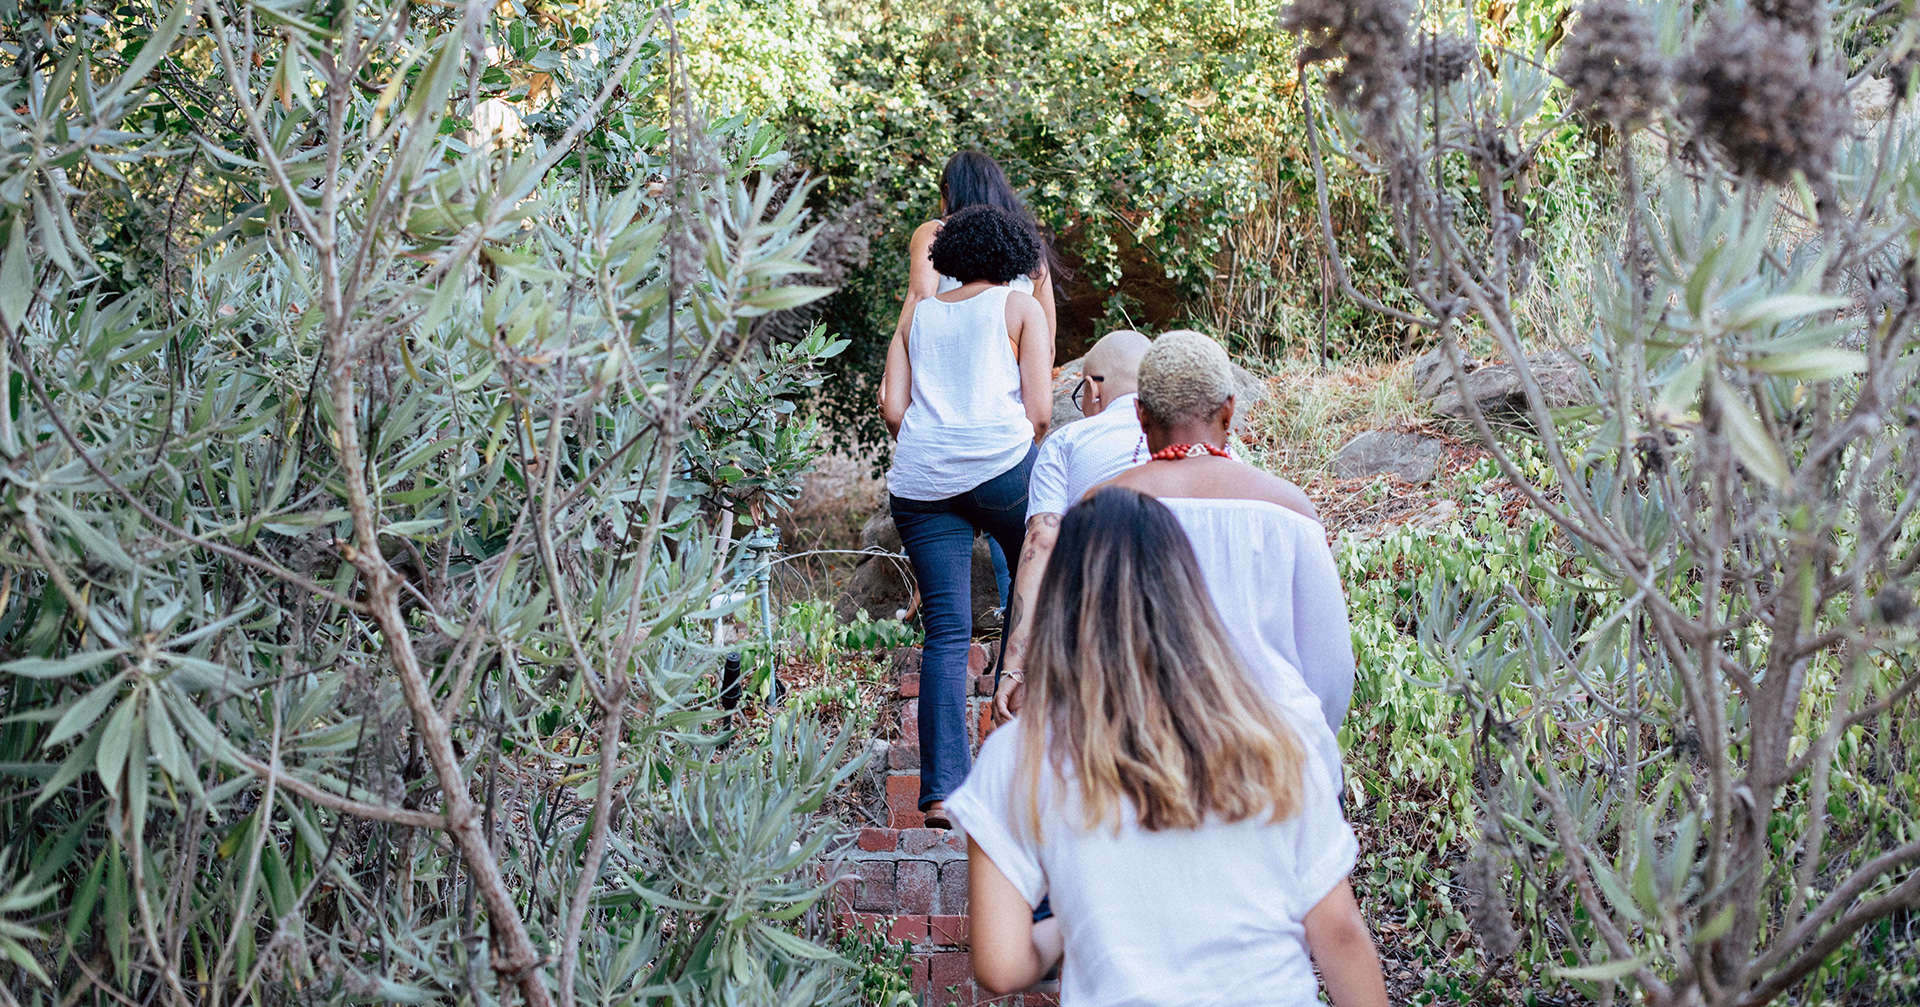 Three people ascending a brick staircase outdoors in Sherman Oaks, surrounded by greenery.